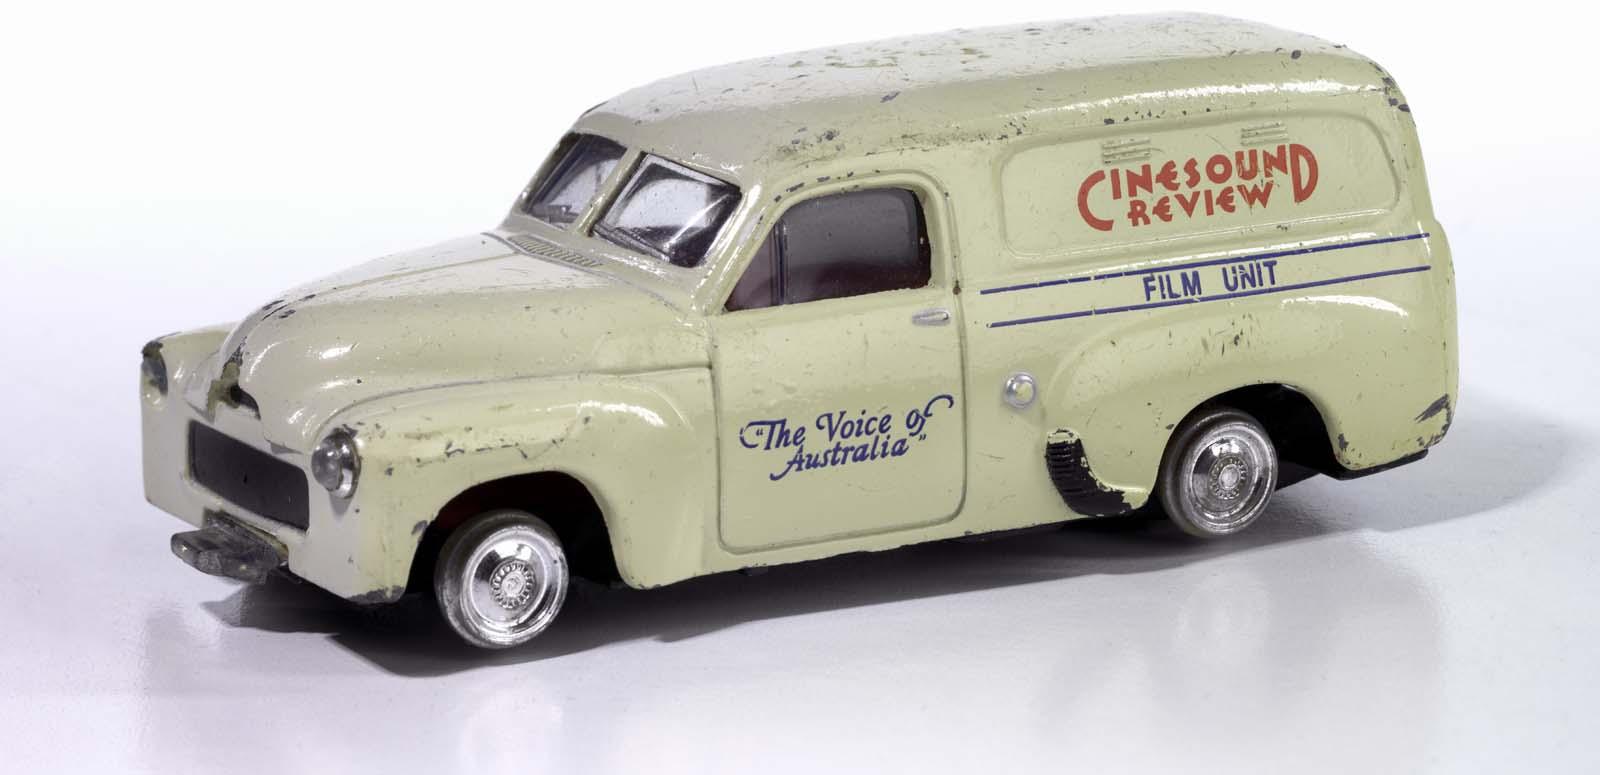 Die-cast scale model of a cream-coloured FJ Holden panel van used by Cinesound Review